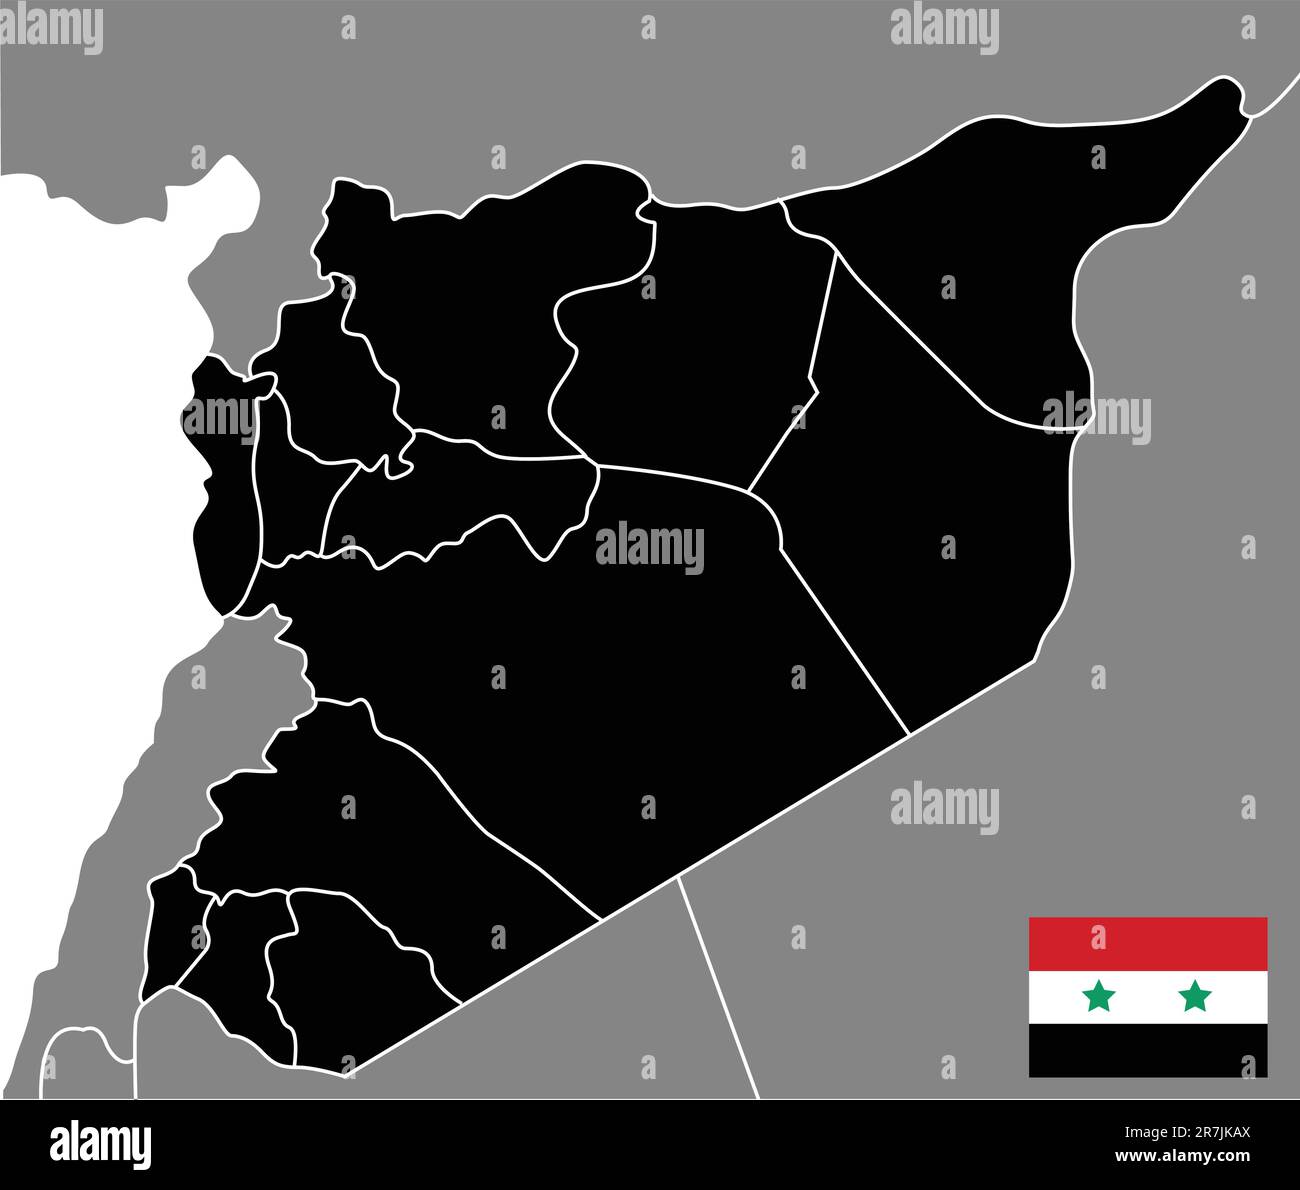 vector illustration of the map of syria Stock Vector